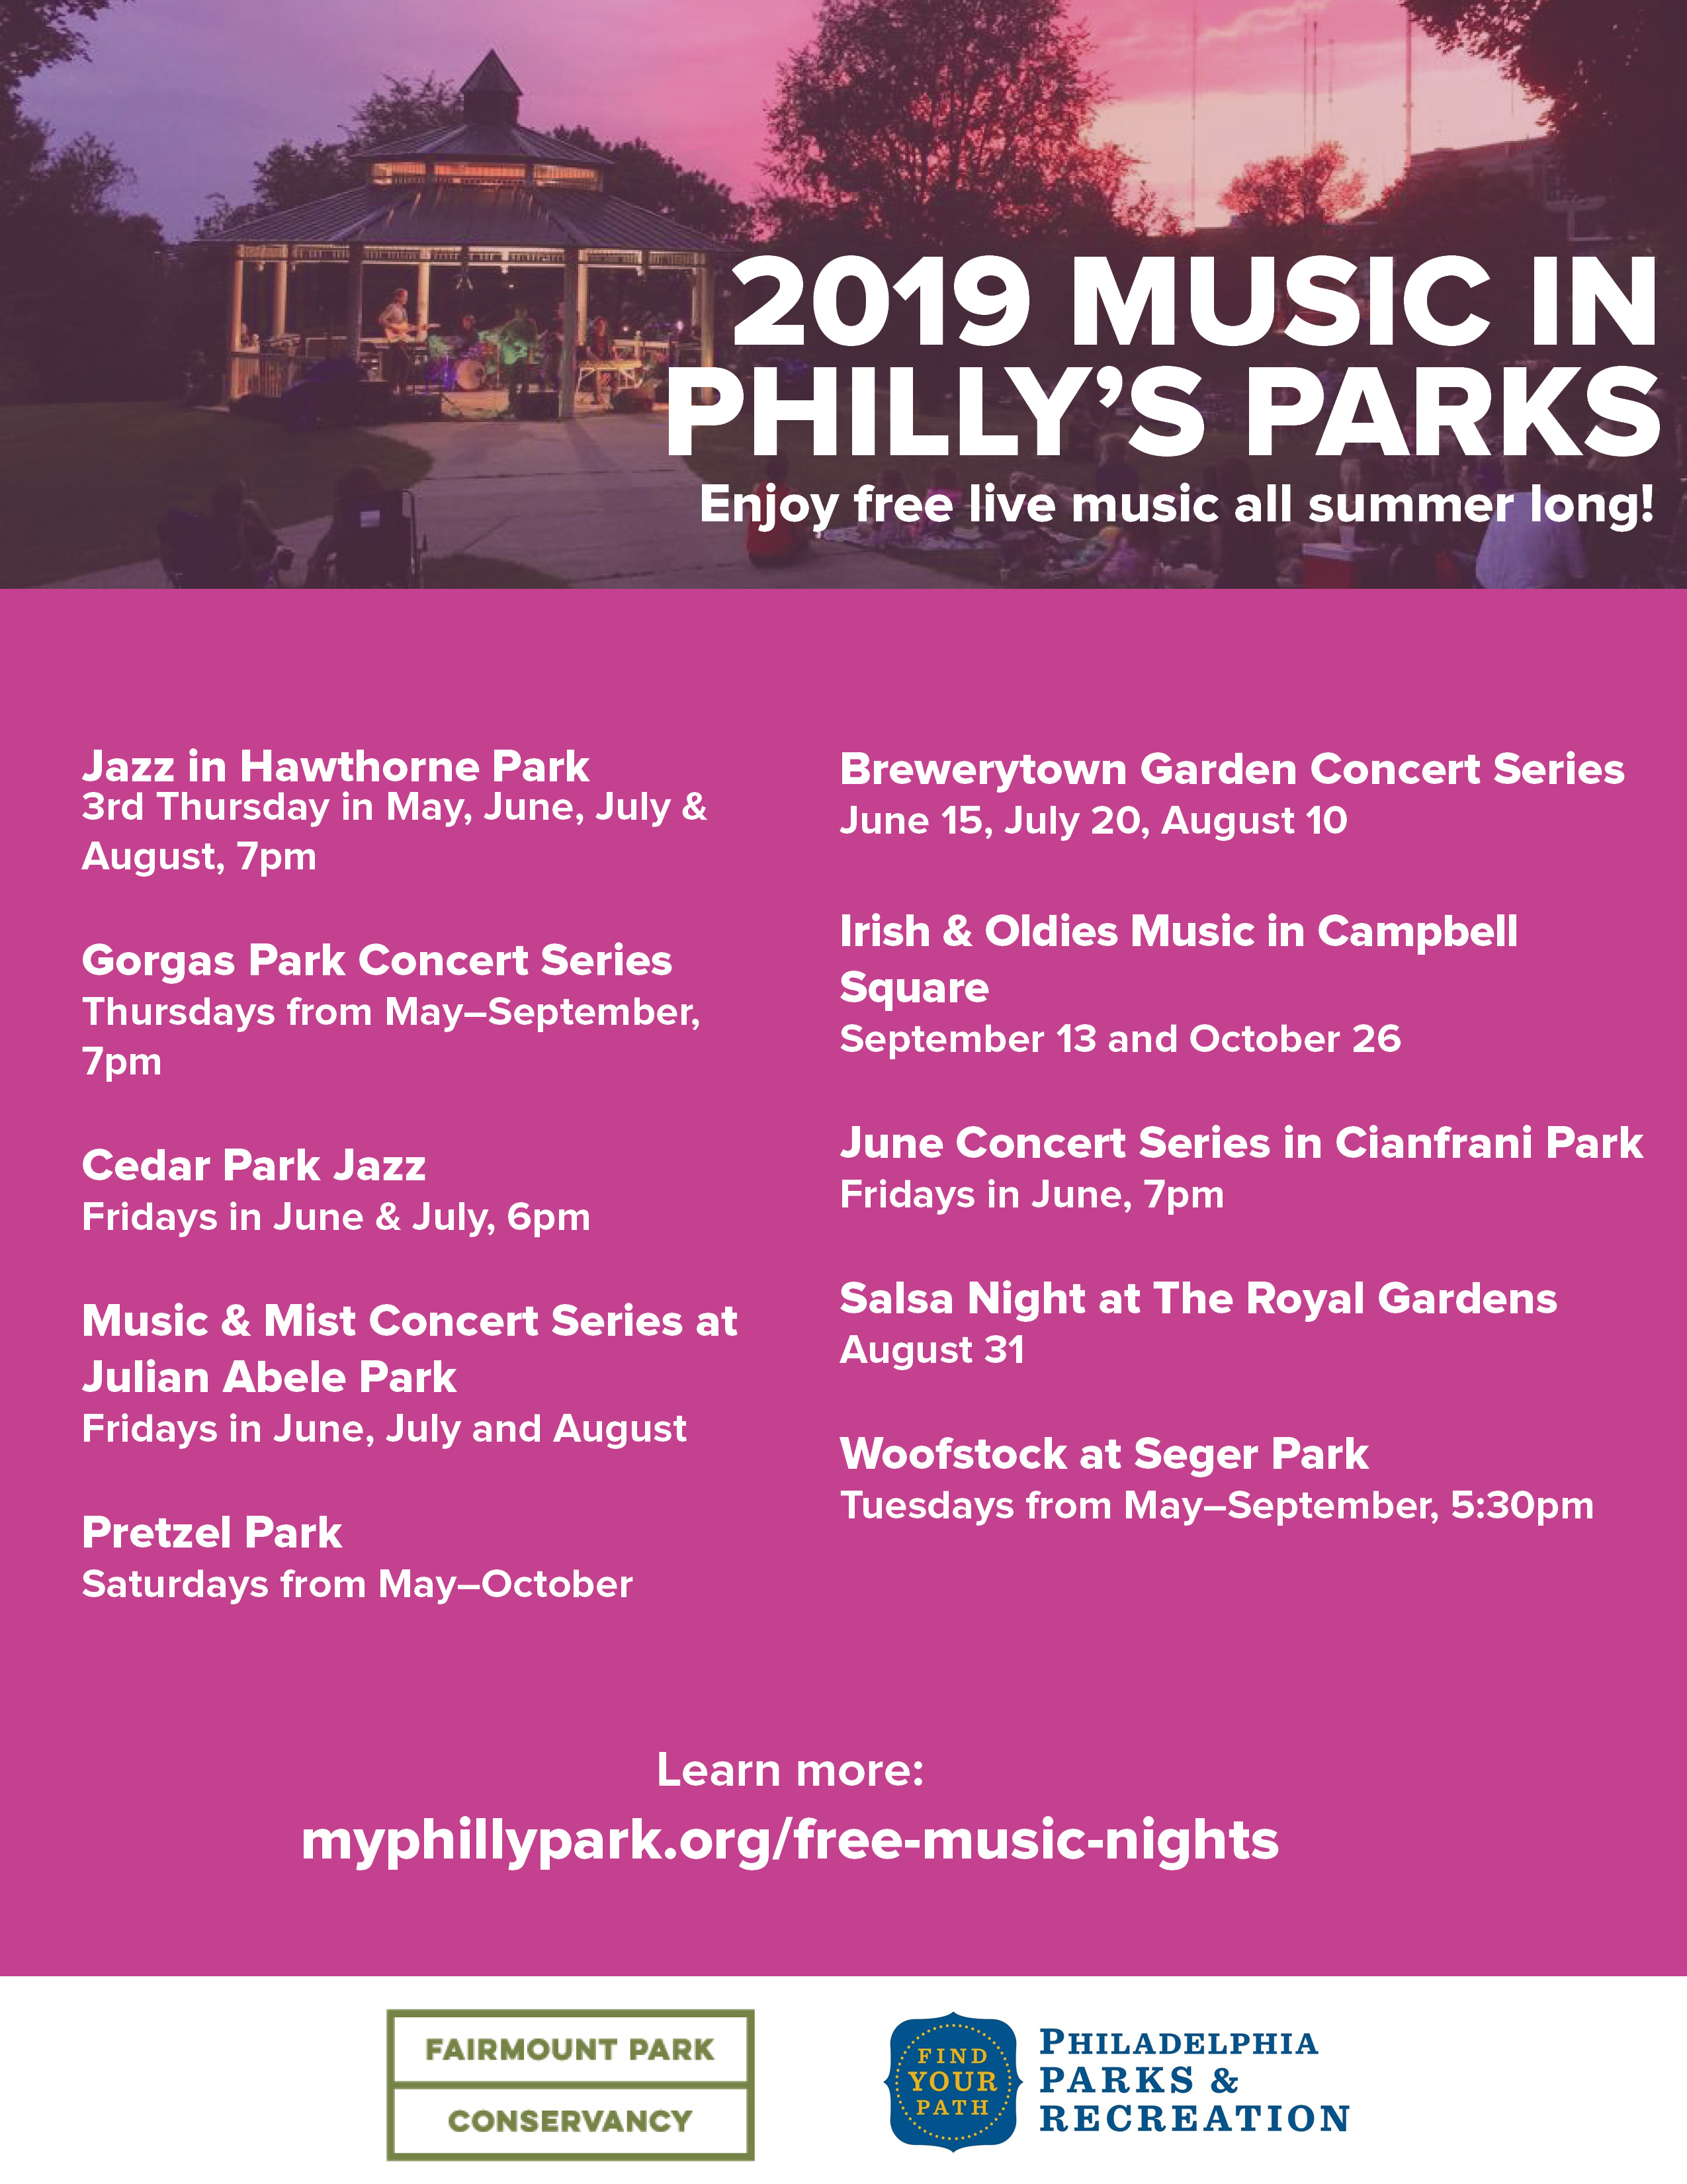 Where to enjoy free music in Philly's parks this summer Fairmount